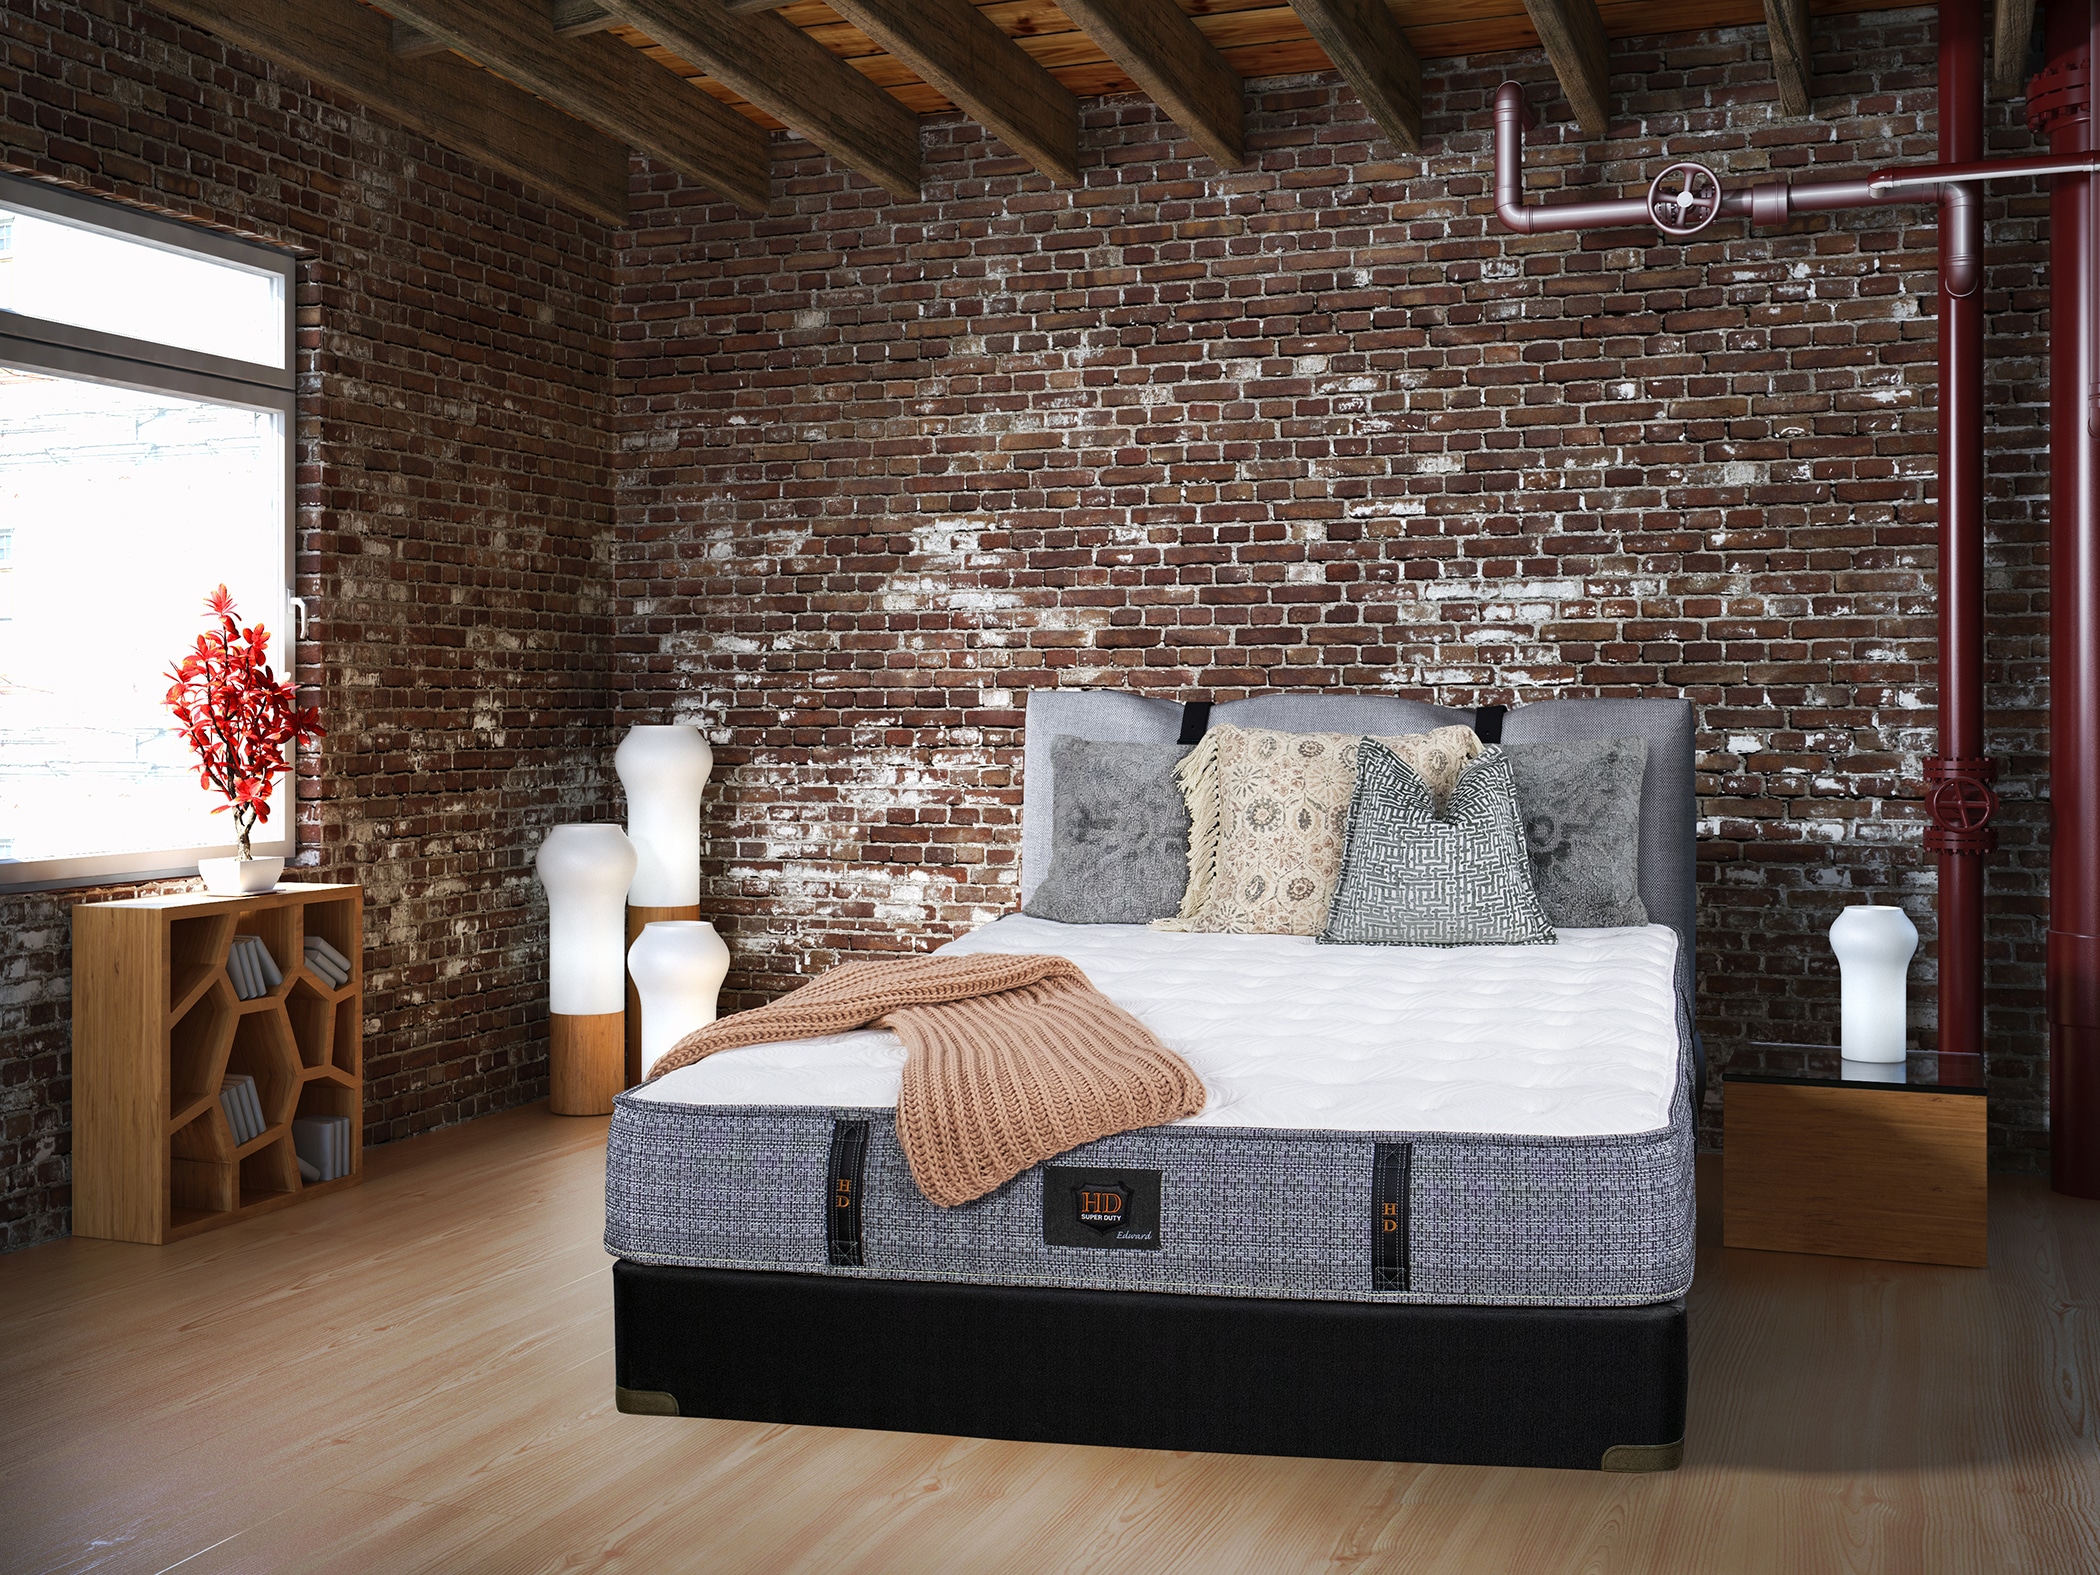 Photo of a bedroom with mattress and throw pillows against an exposed brick wall and modern decor